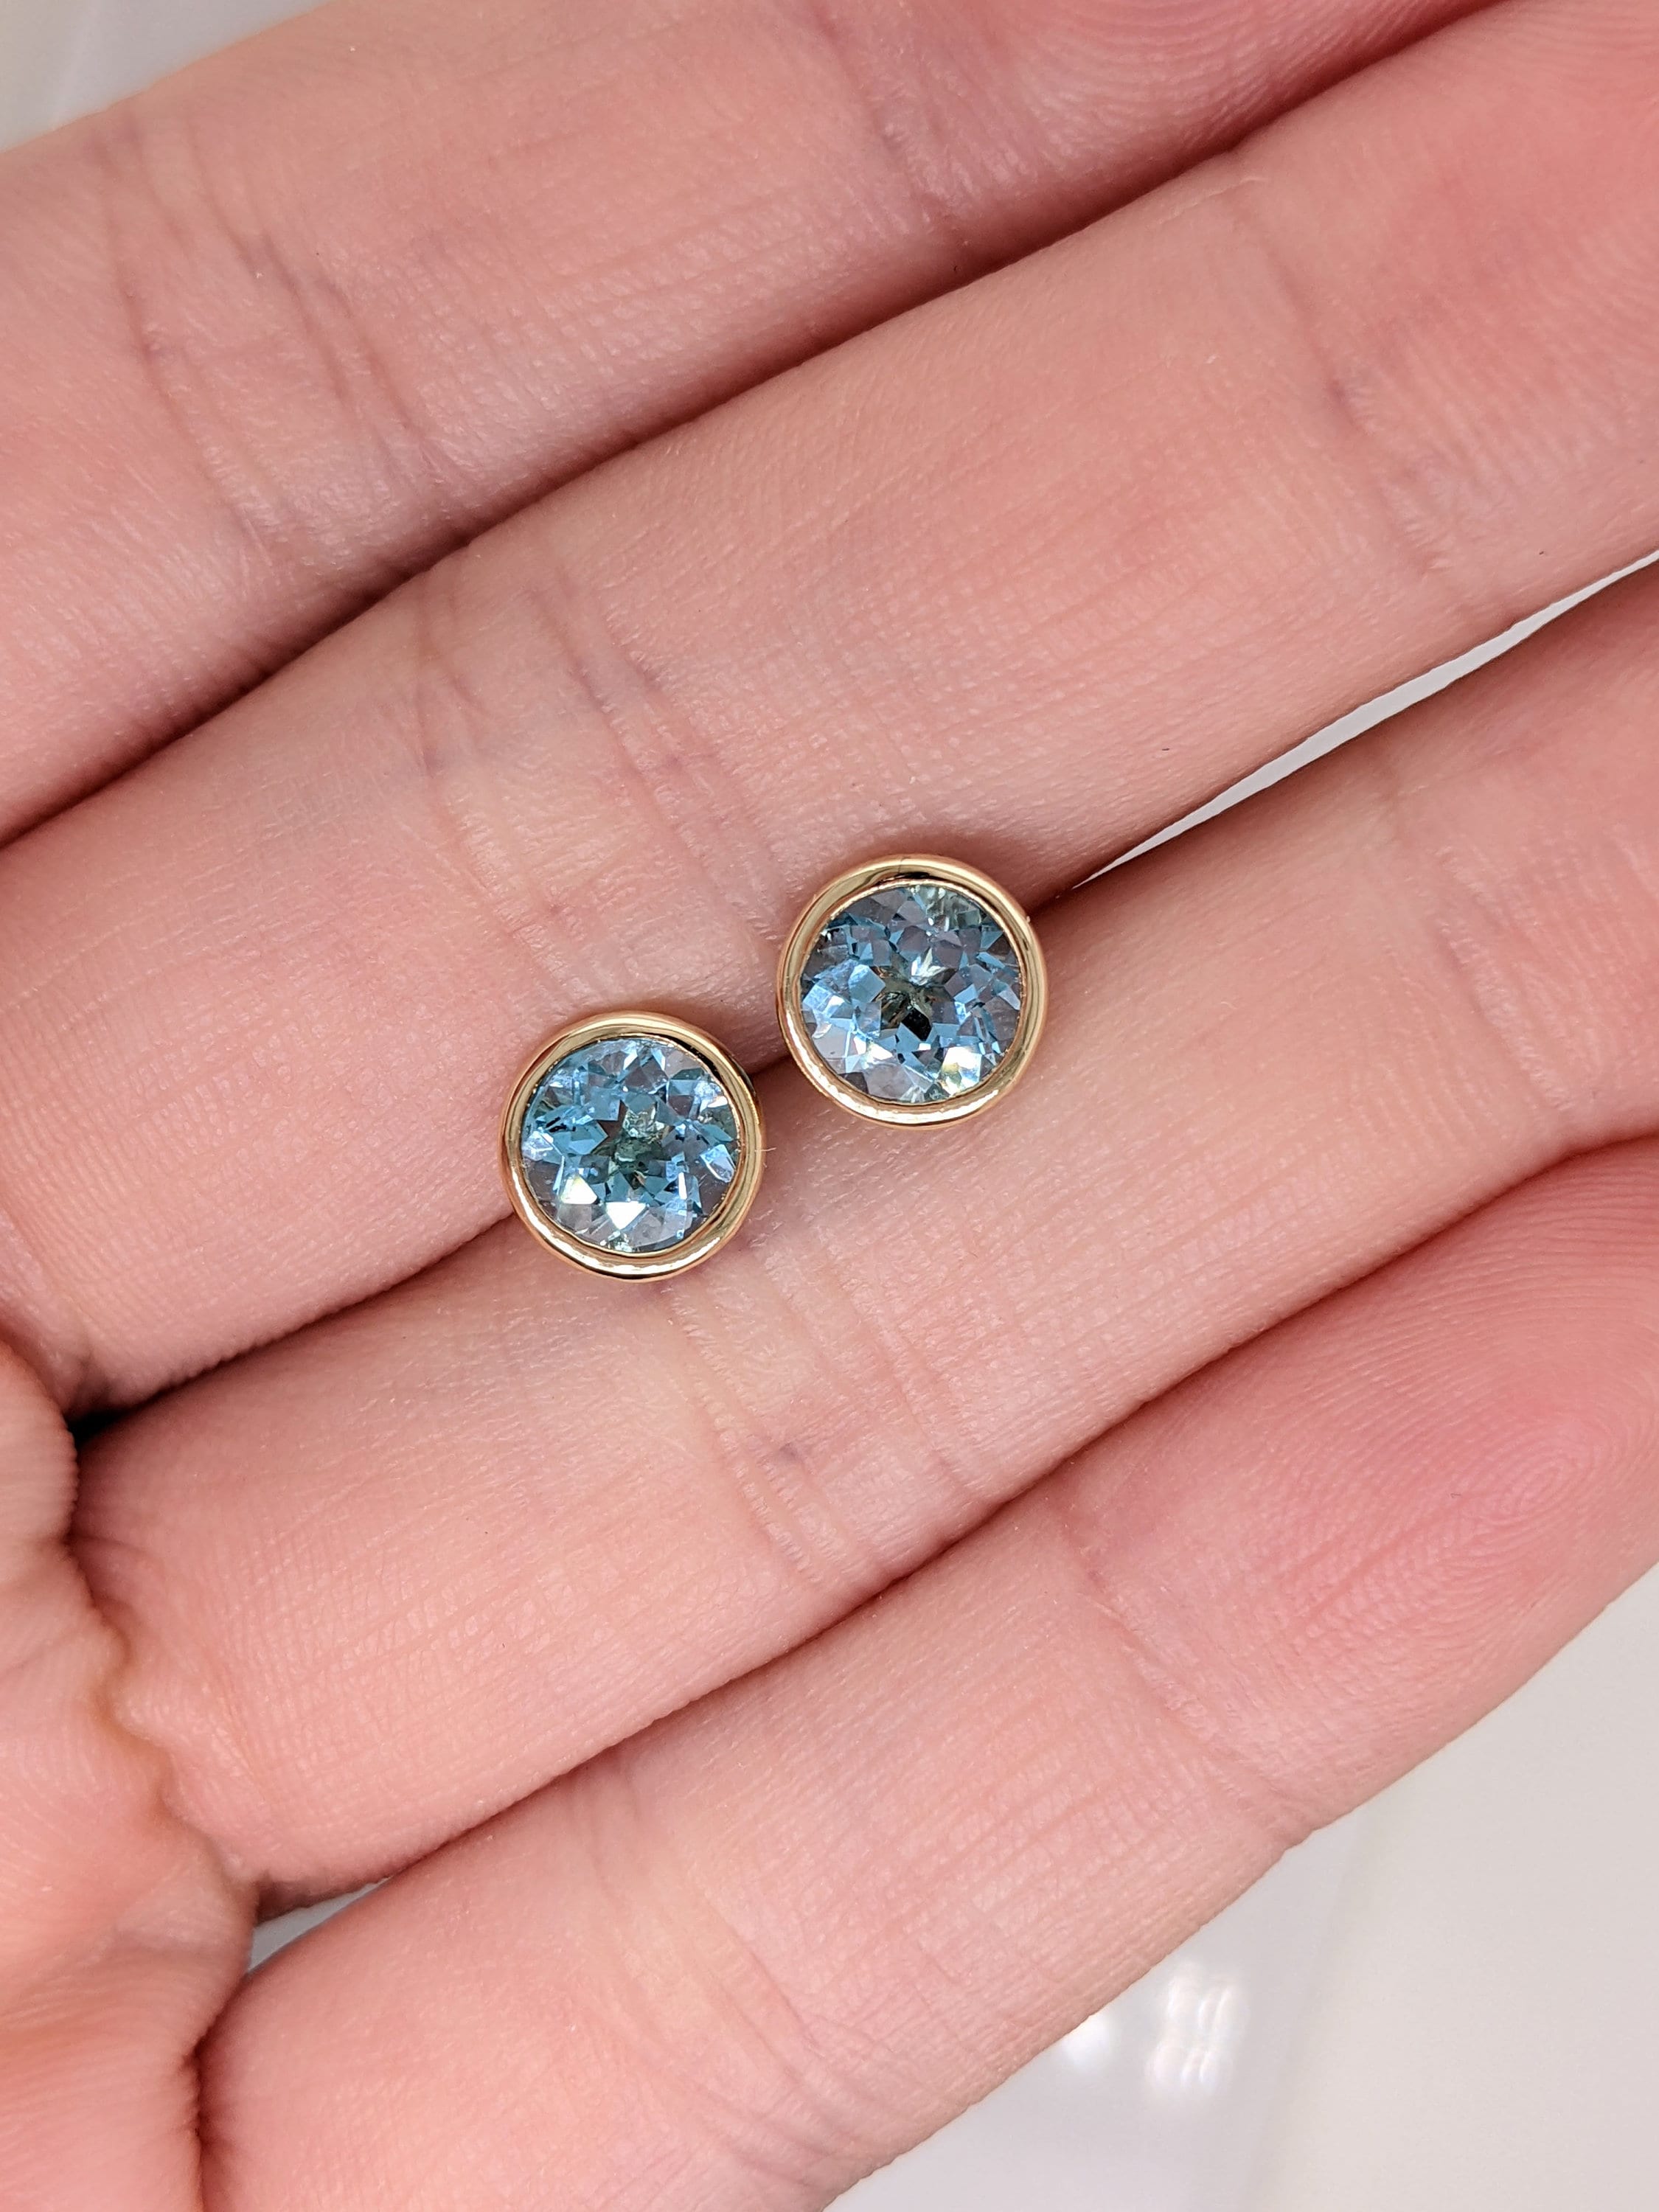 Sky Blue Swiss Topaz Studs in Solid 14K White, Yellow or Rose Gold | Round 6mm | Bezel | Minimalist | Customizable | Daily Wear | Setting